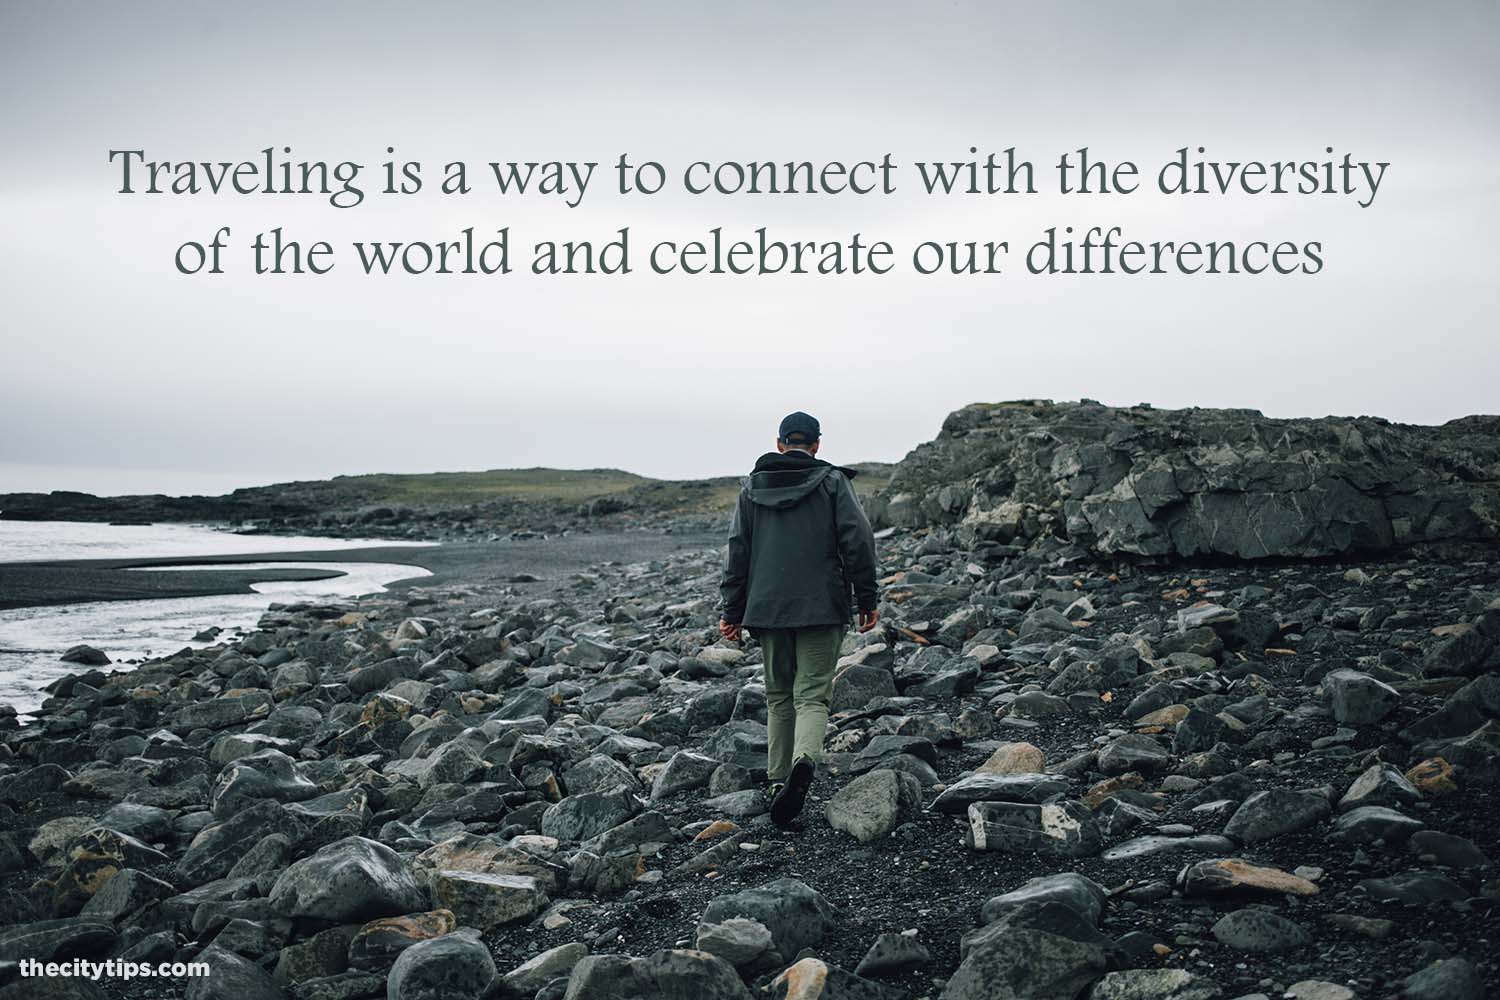 "Traveling is a way to connect with the diversity of the world and celebrate our differences." by Anonymous